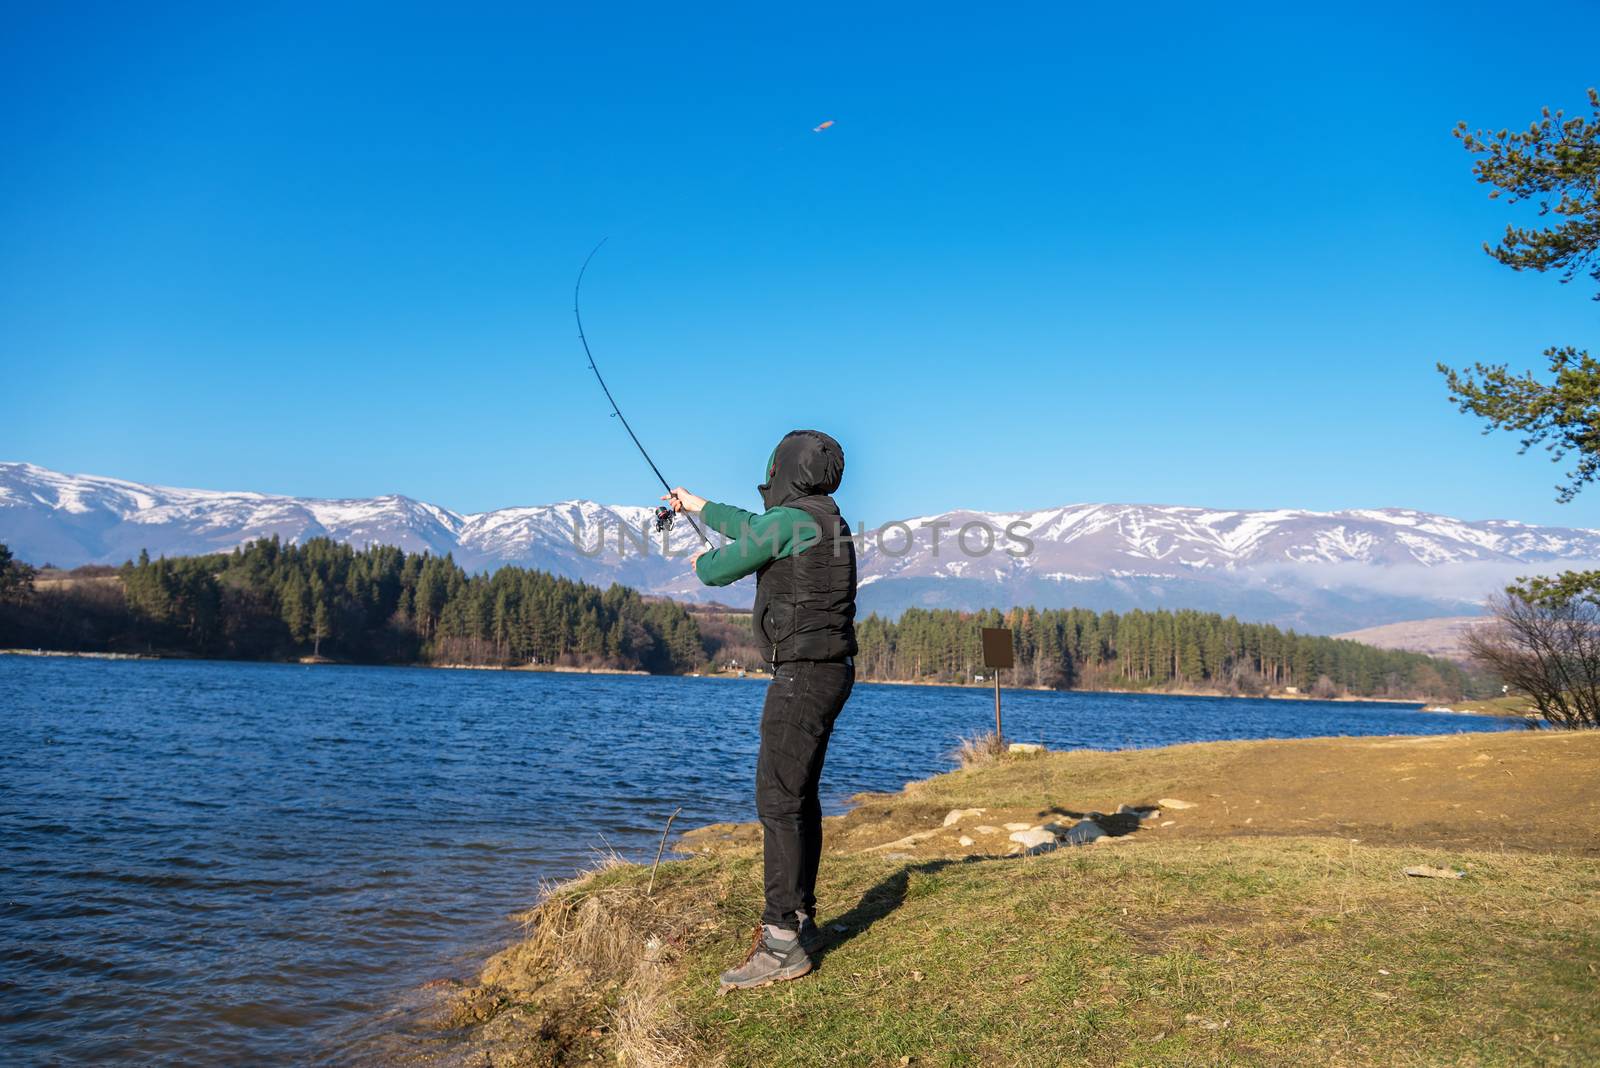 A male fisherman on the lake is standing in the water and fishing for a fishing rod. Fishing hobby vacation concept. Copy space.